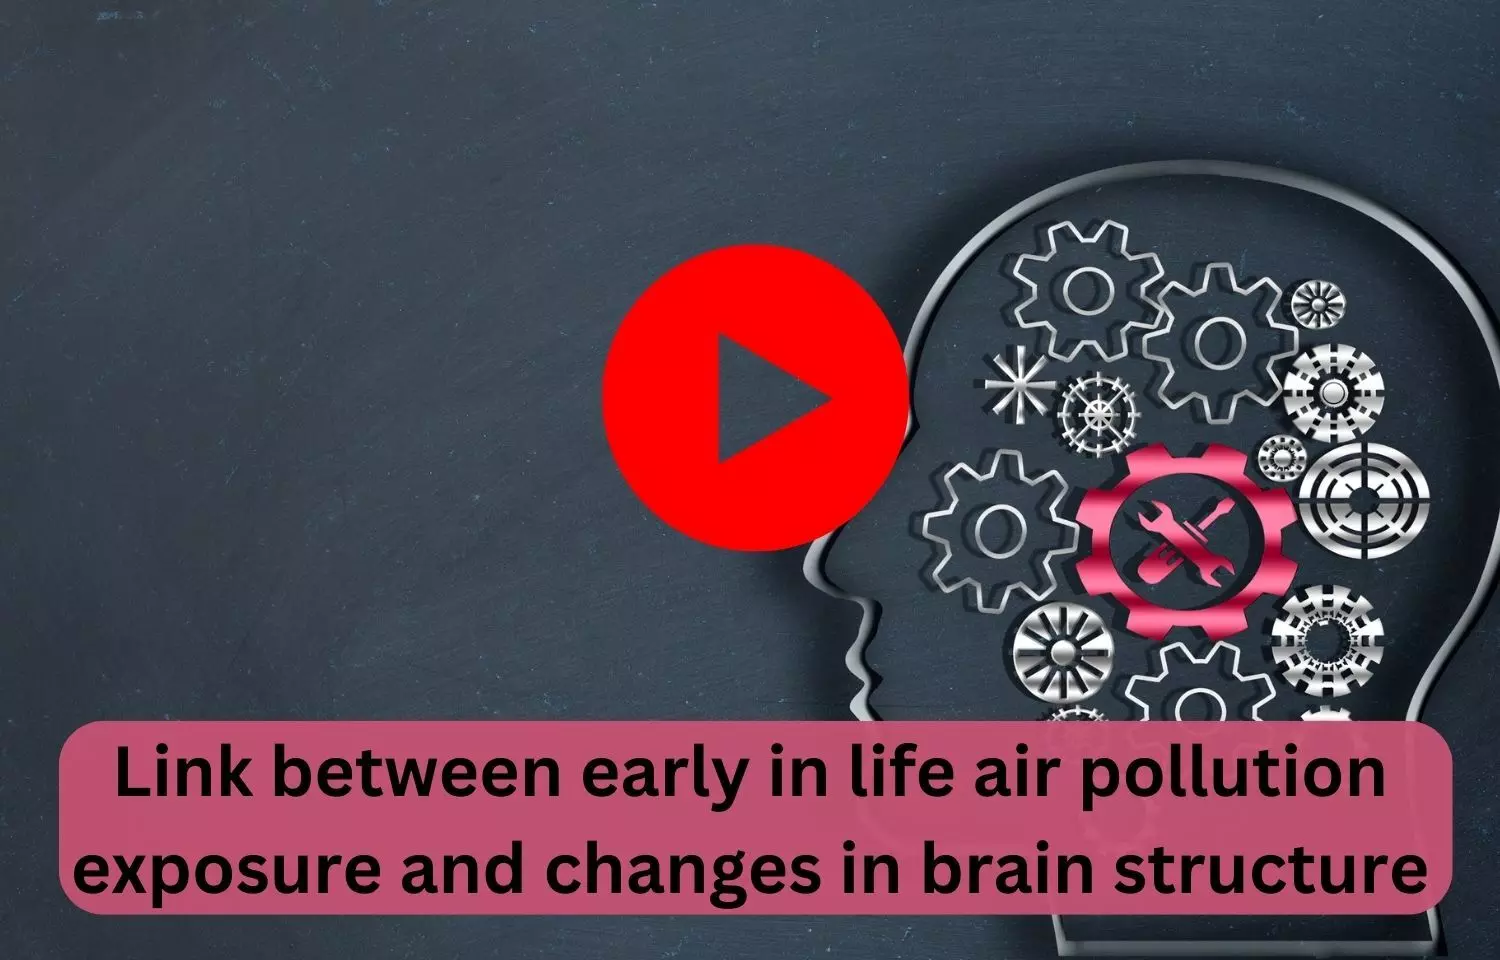 Link between early in life air pollution exposure and changes in brain structure